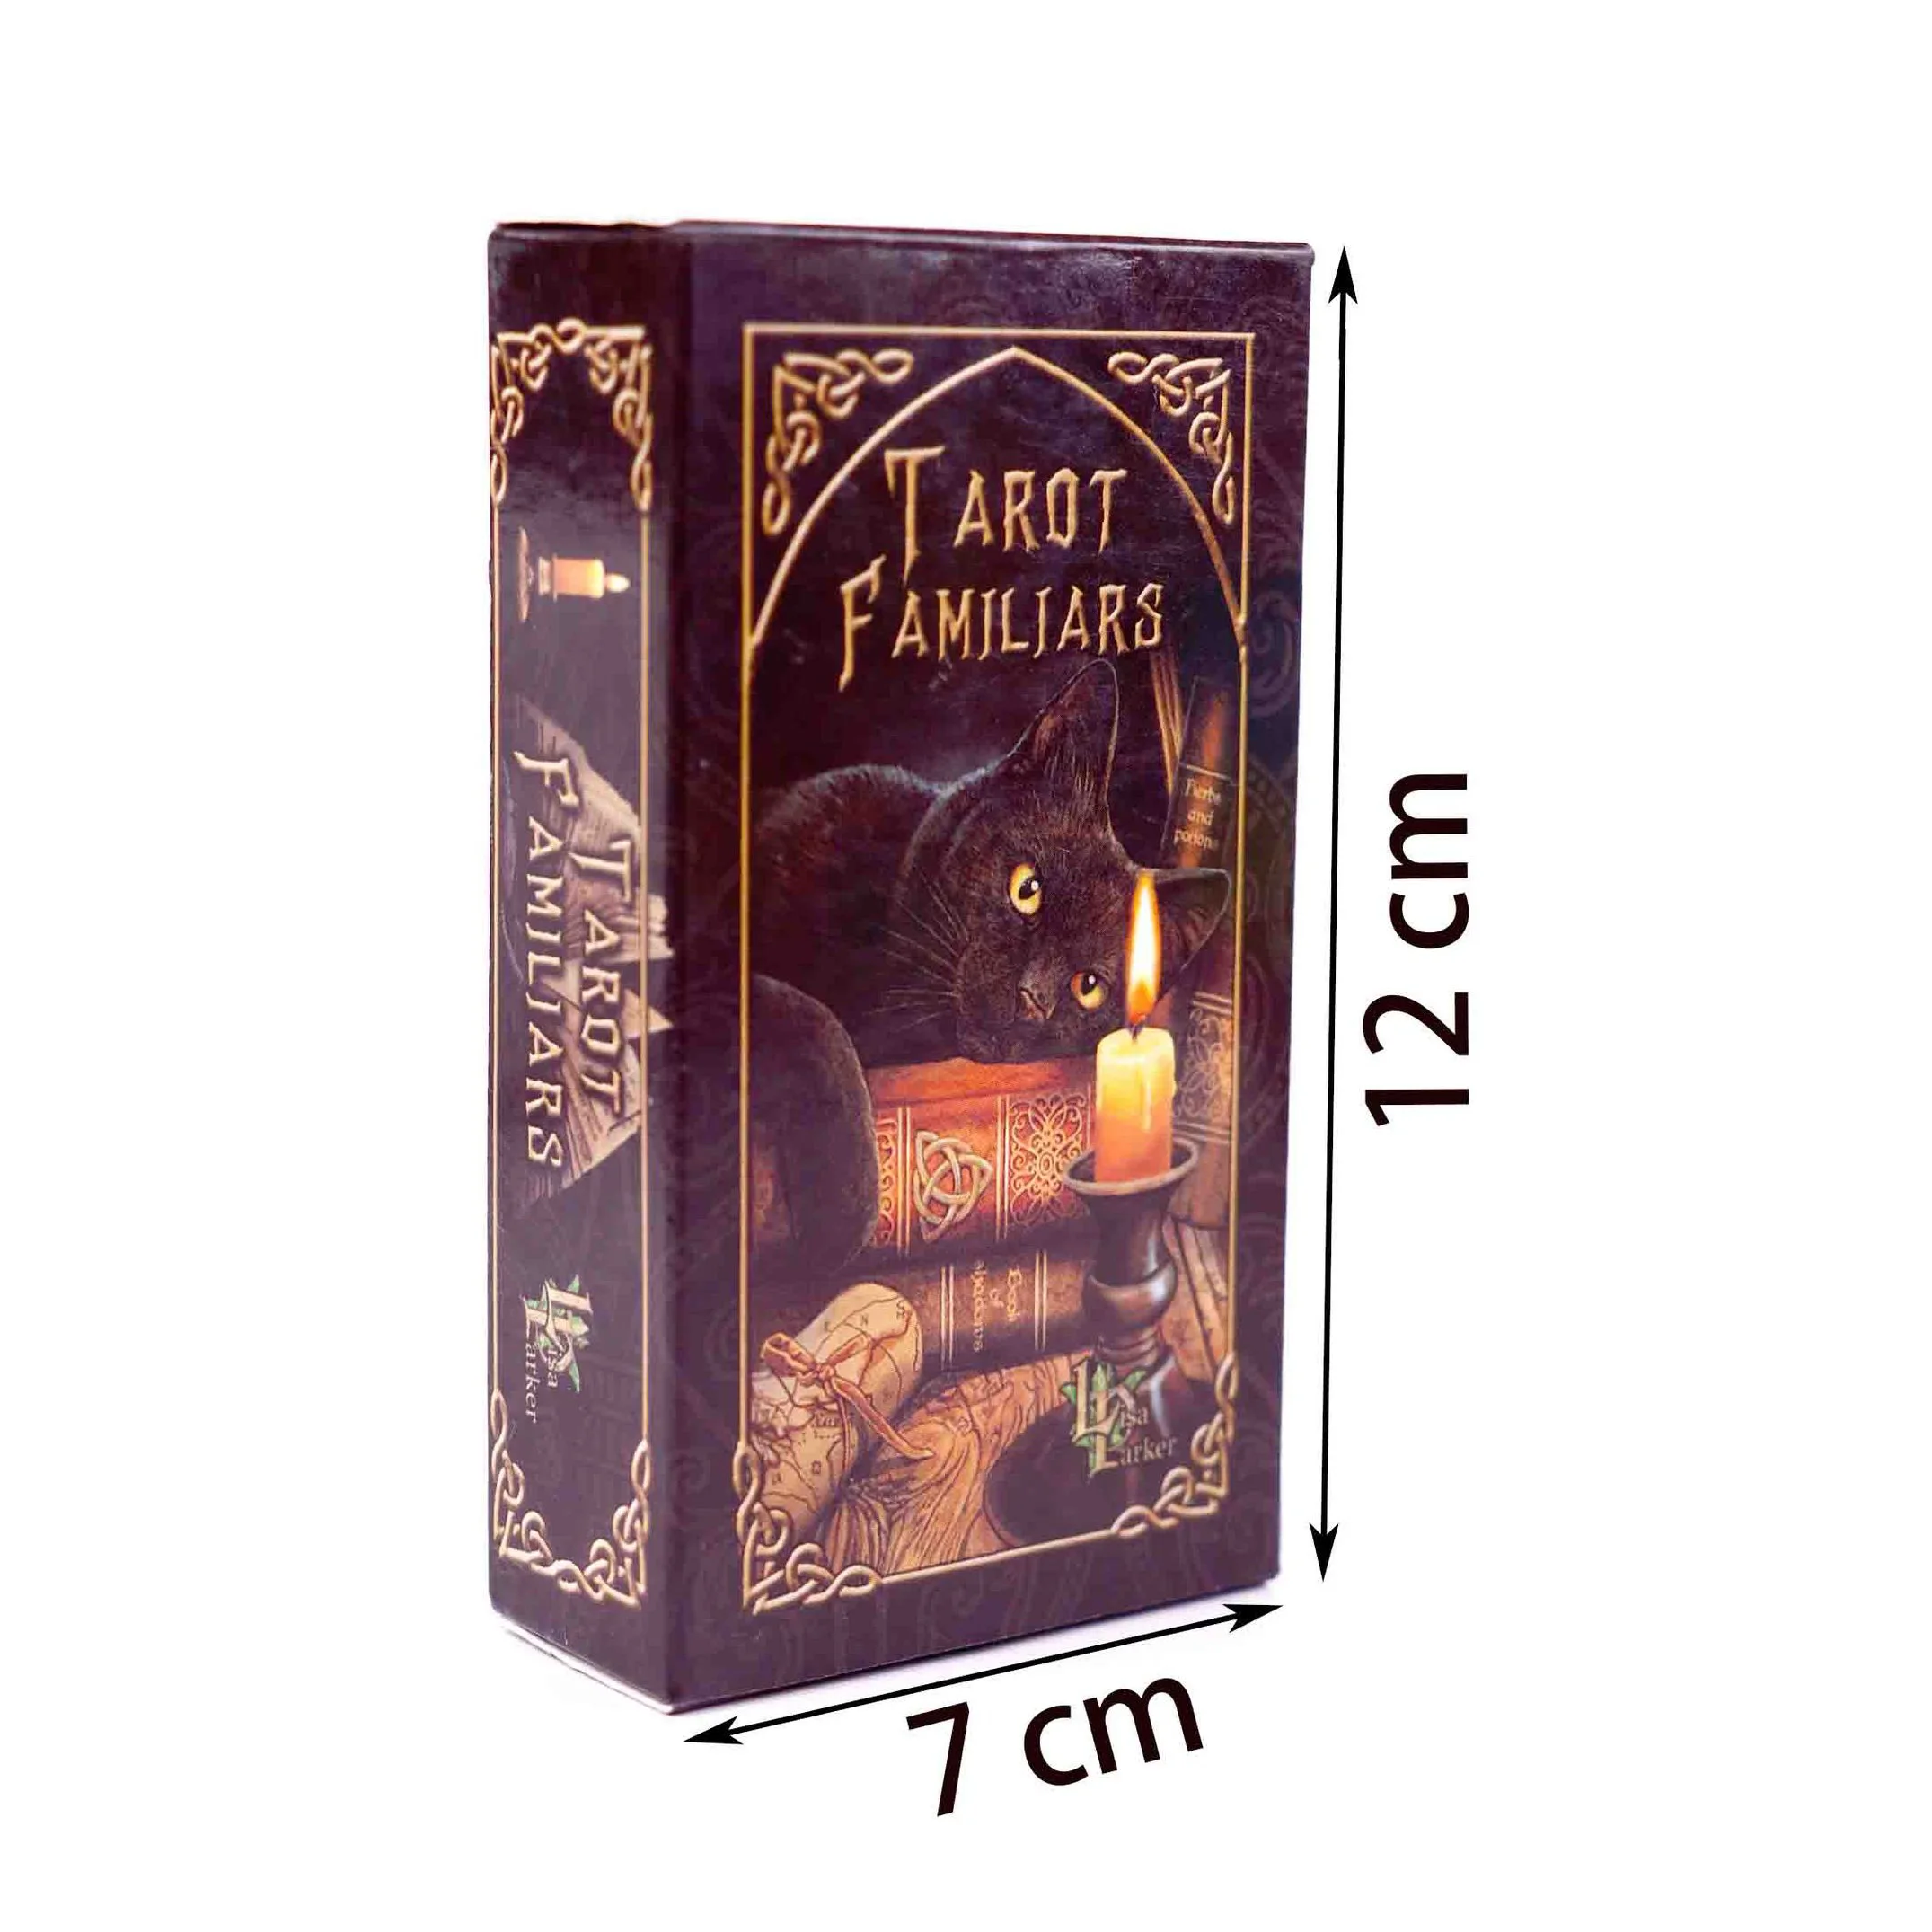 

New Tarot Familiars Deck Cards Fate Divination Table Games Playing Card Family Party Board Game Entertainment